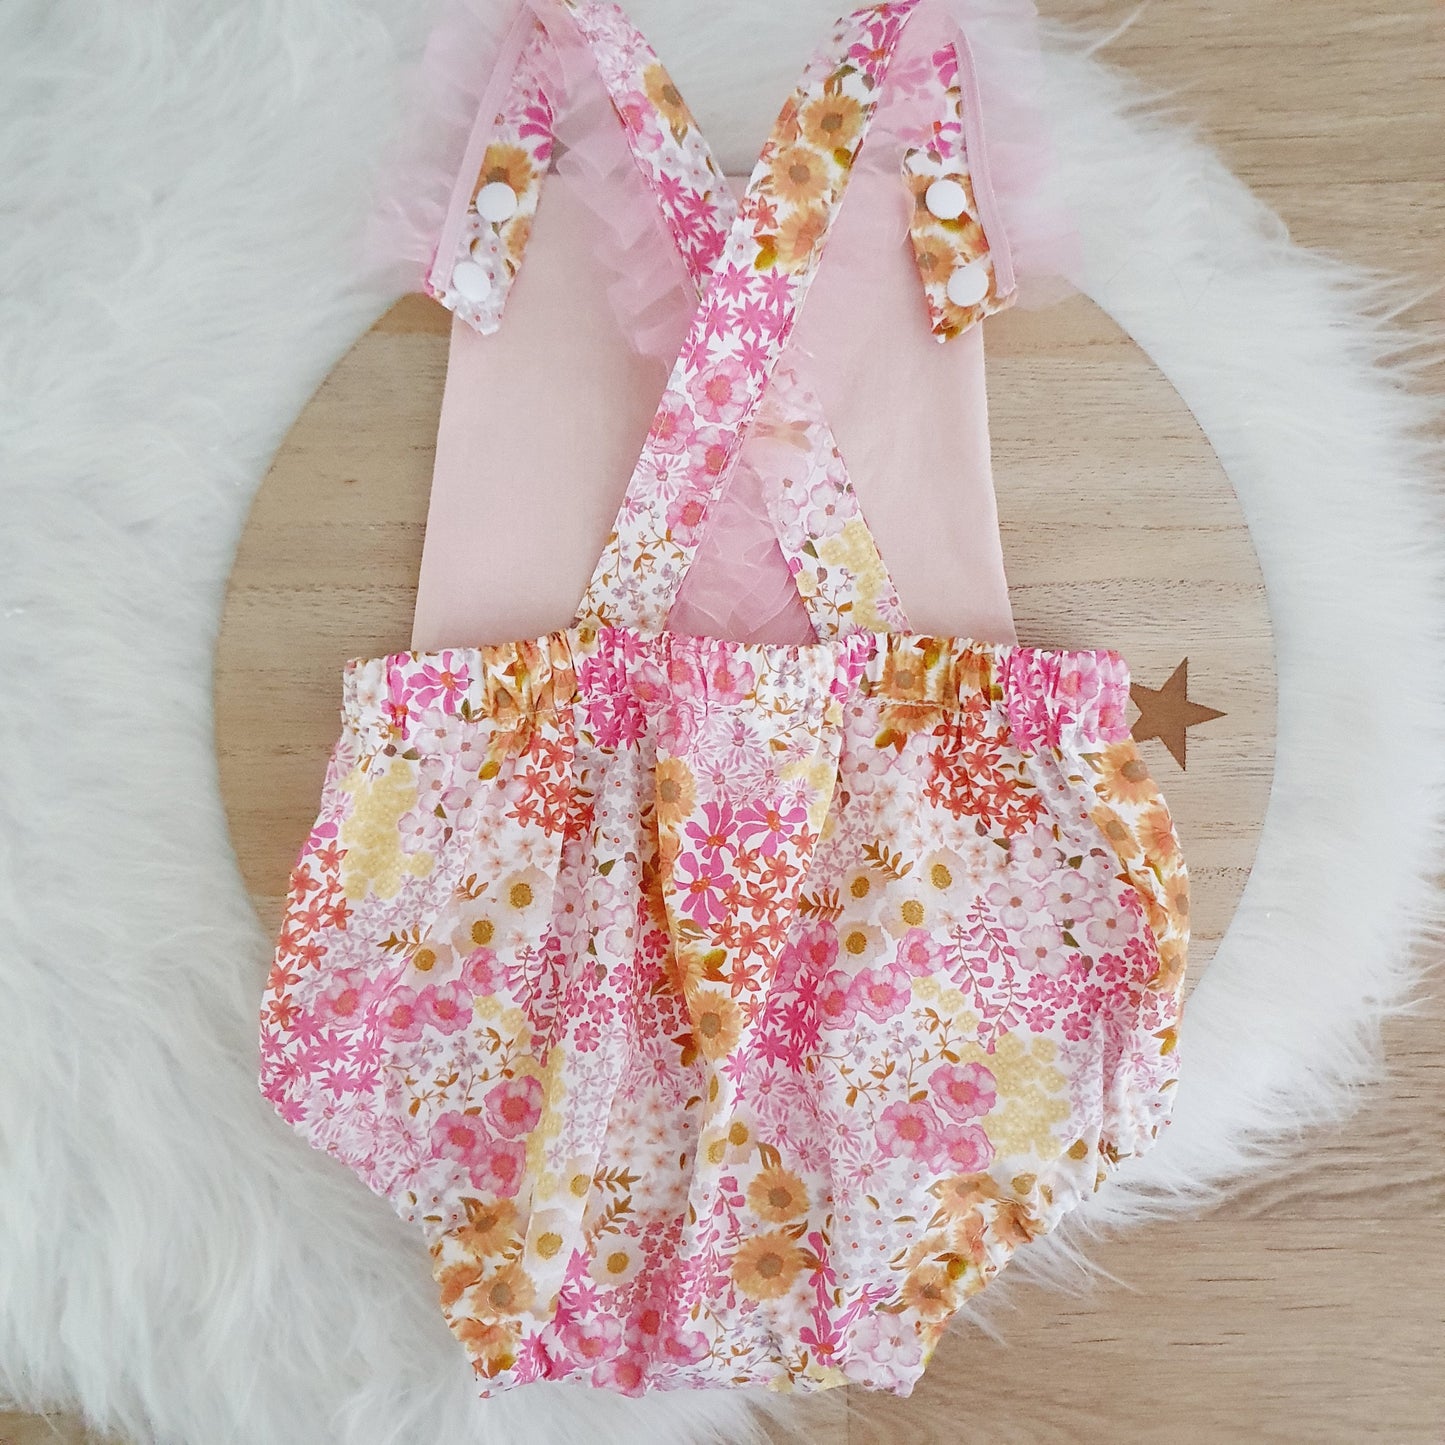 PINK / ORANGE Baby Romper with trim, Handmade Baby Clothing, Size 1 - 1st Birthday Clothing / Cake Smash Outfit, 12 - 18 months